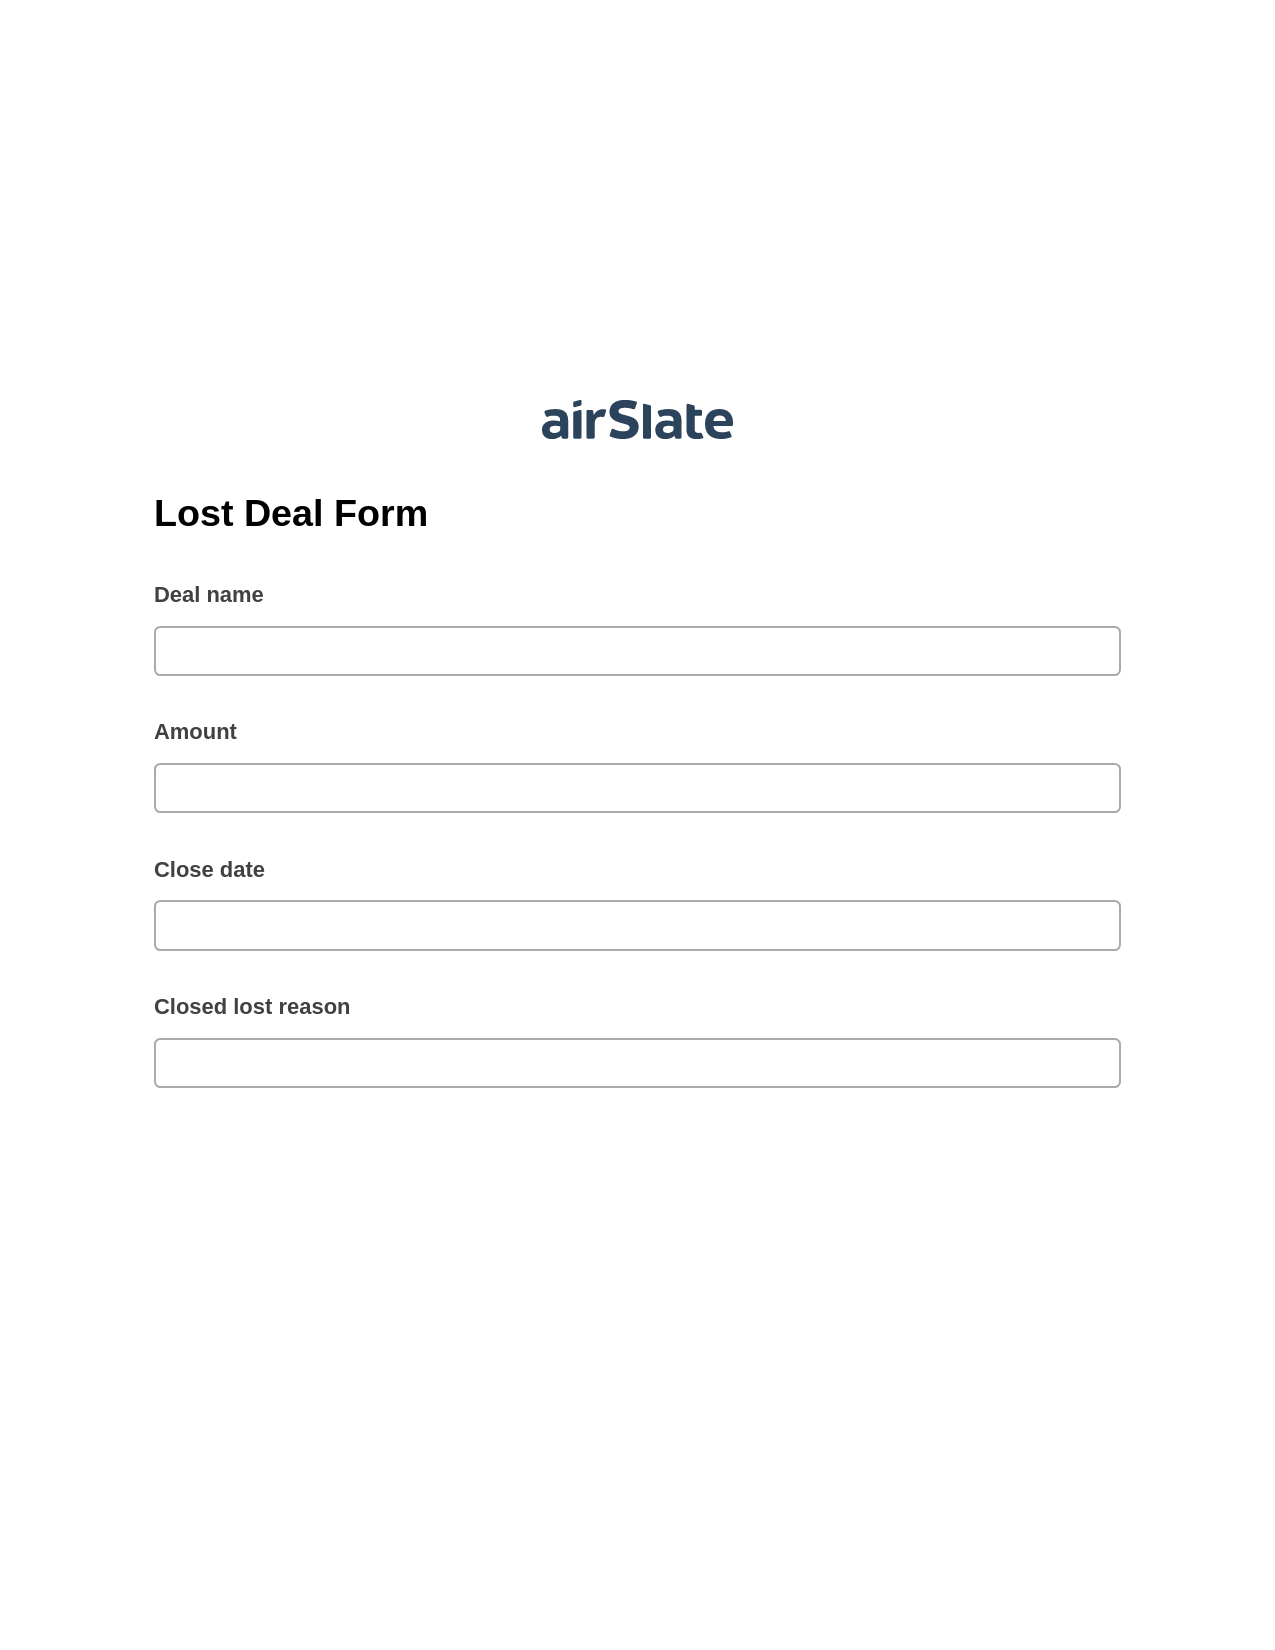 Lost Deal Form Prefill from NetSuite records, Add Tags to Slate Bot, Export to Google Sheet Bot